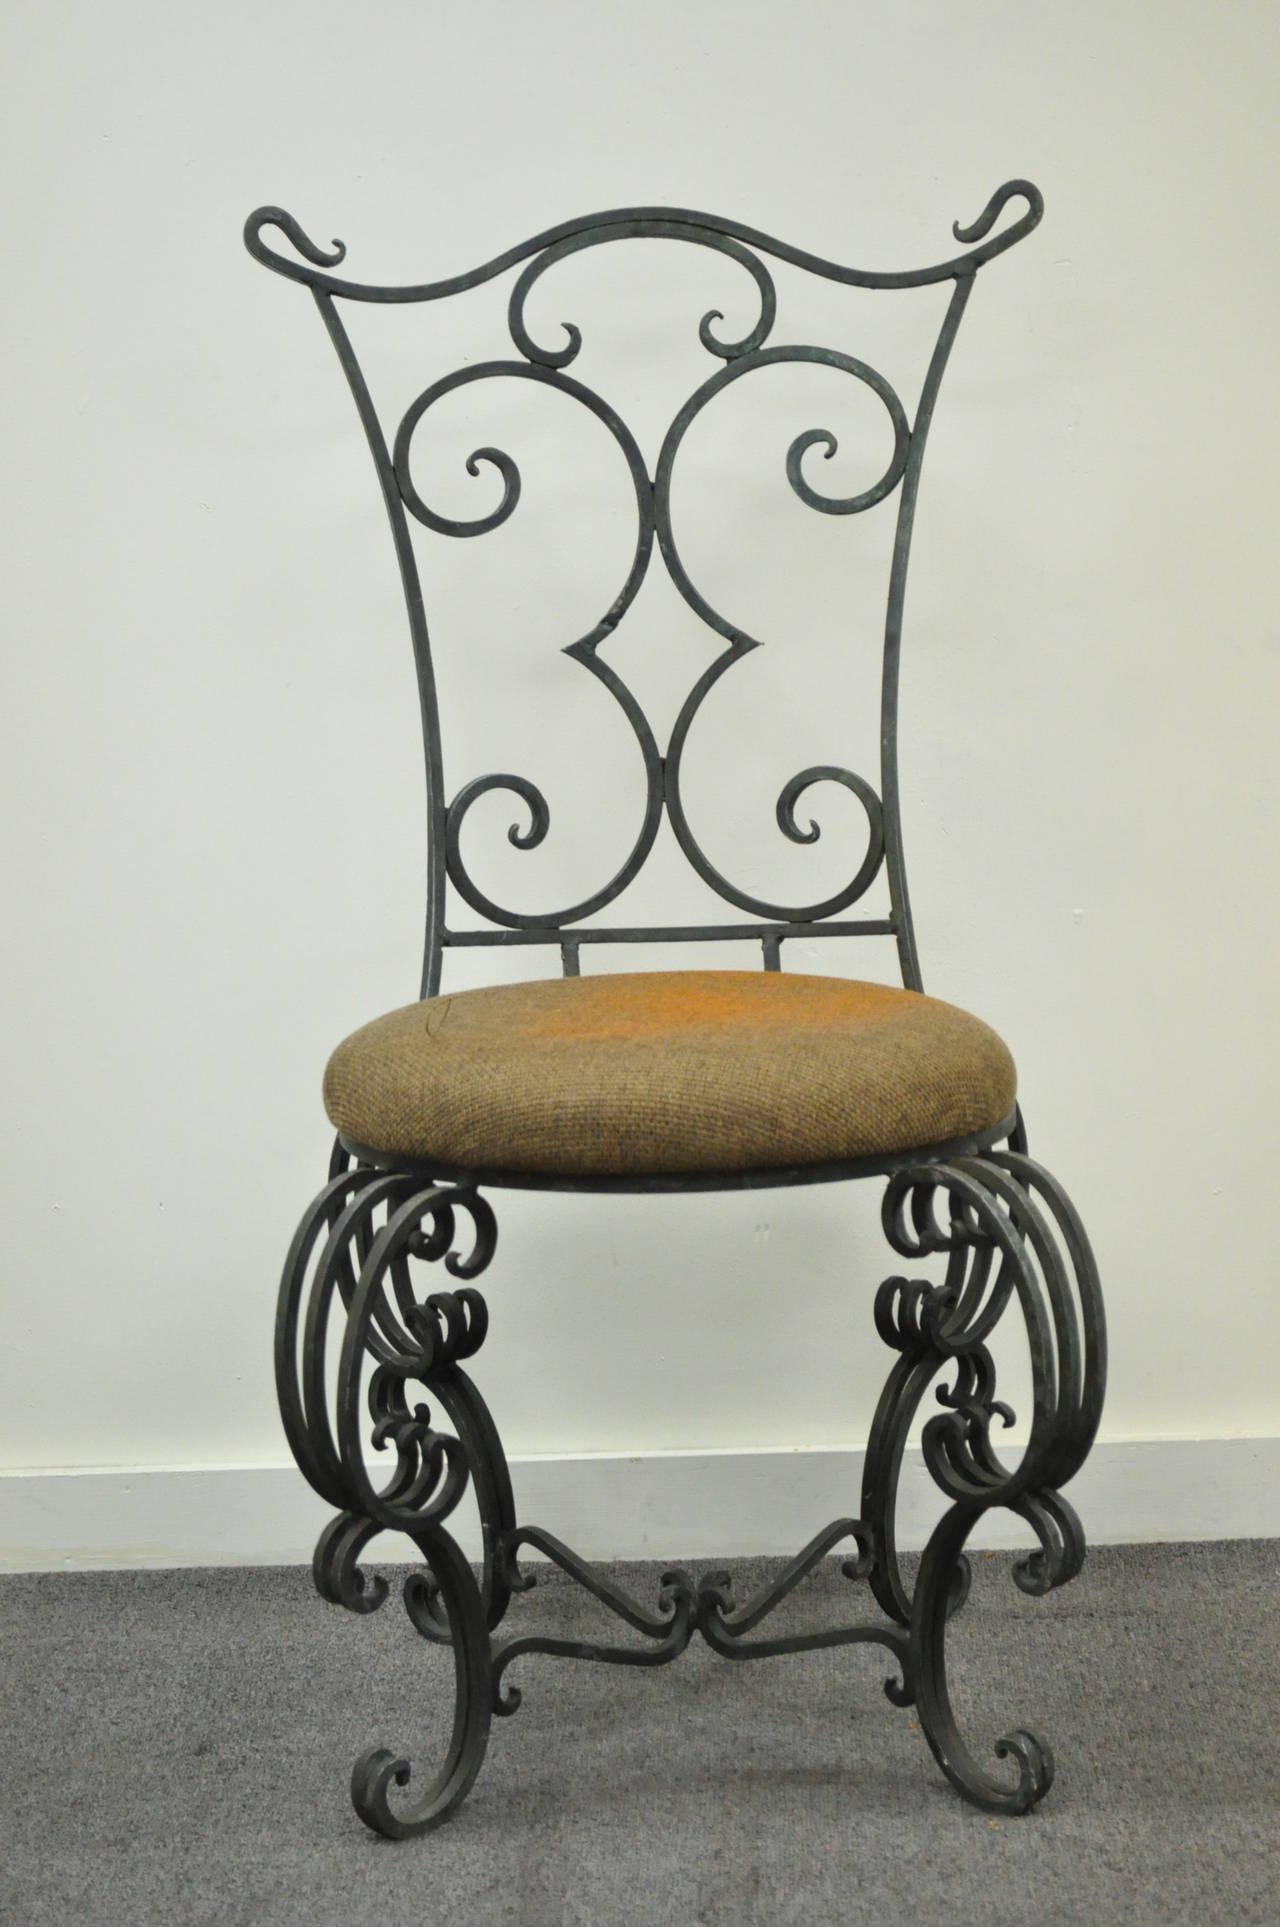 Stunning Vintage French Art Nouveau Style Scrolling Side Chair with a Hand Wrought and Forged Iron Frame. Item features the most beautiful and whimsical lines throughout including the ornate back rest, finials, legs, and stretcher supported base.